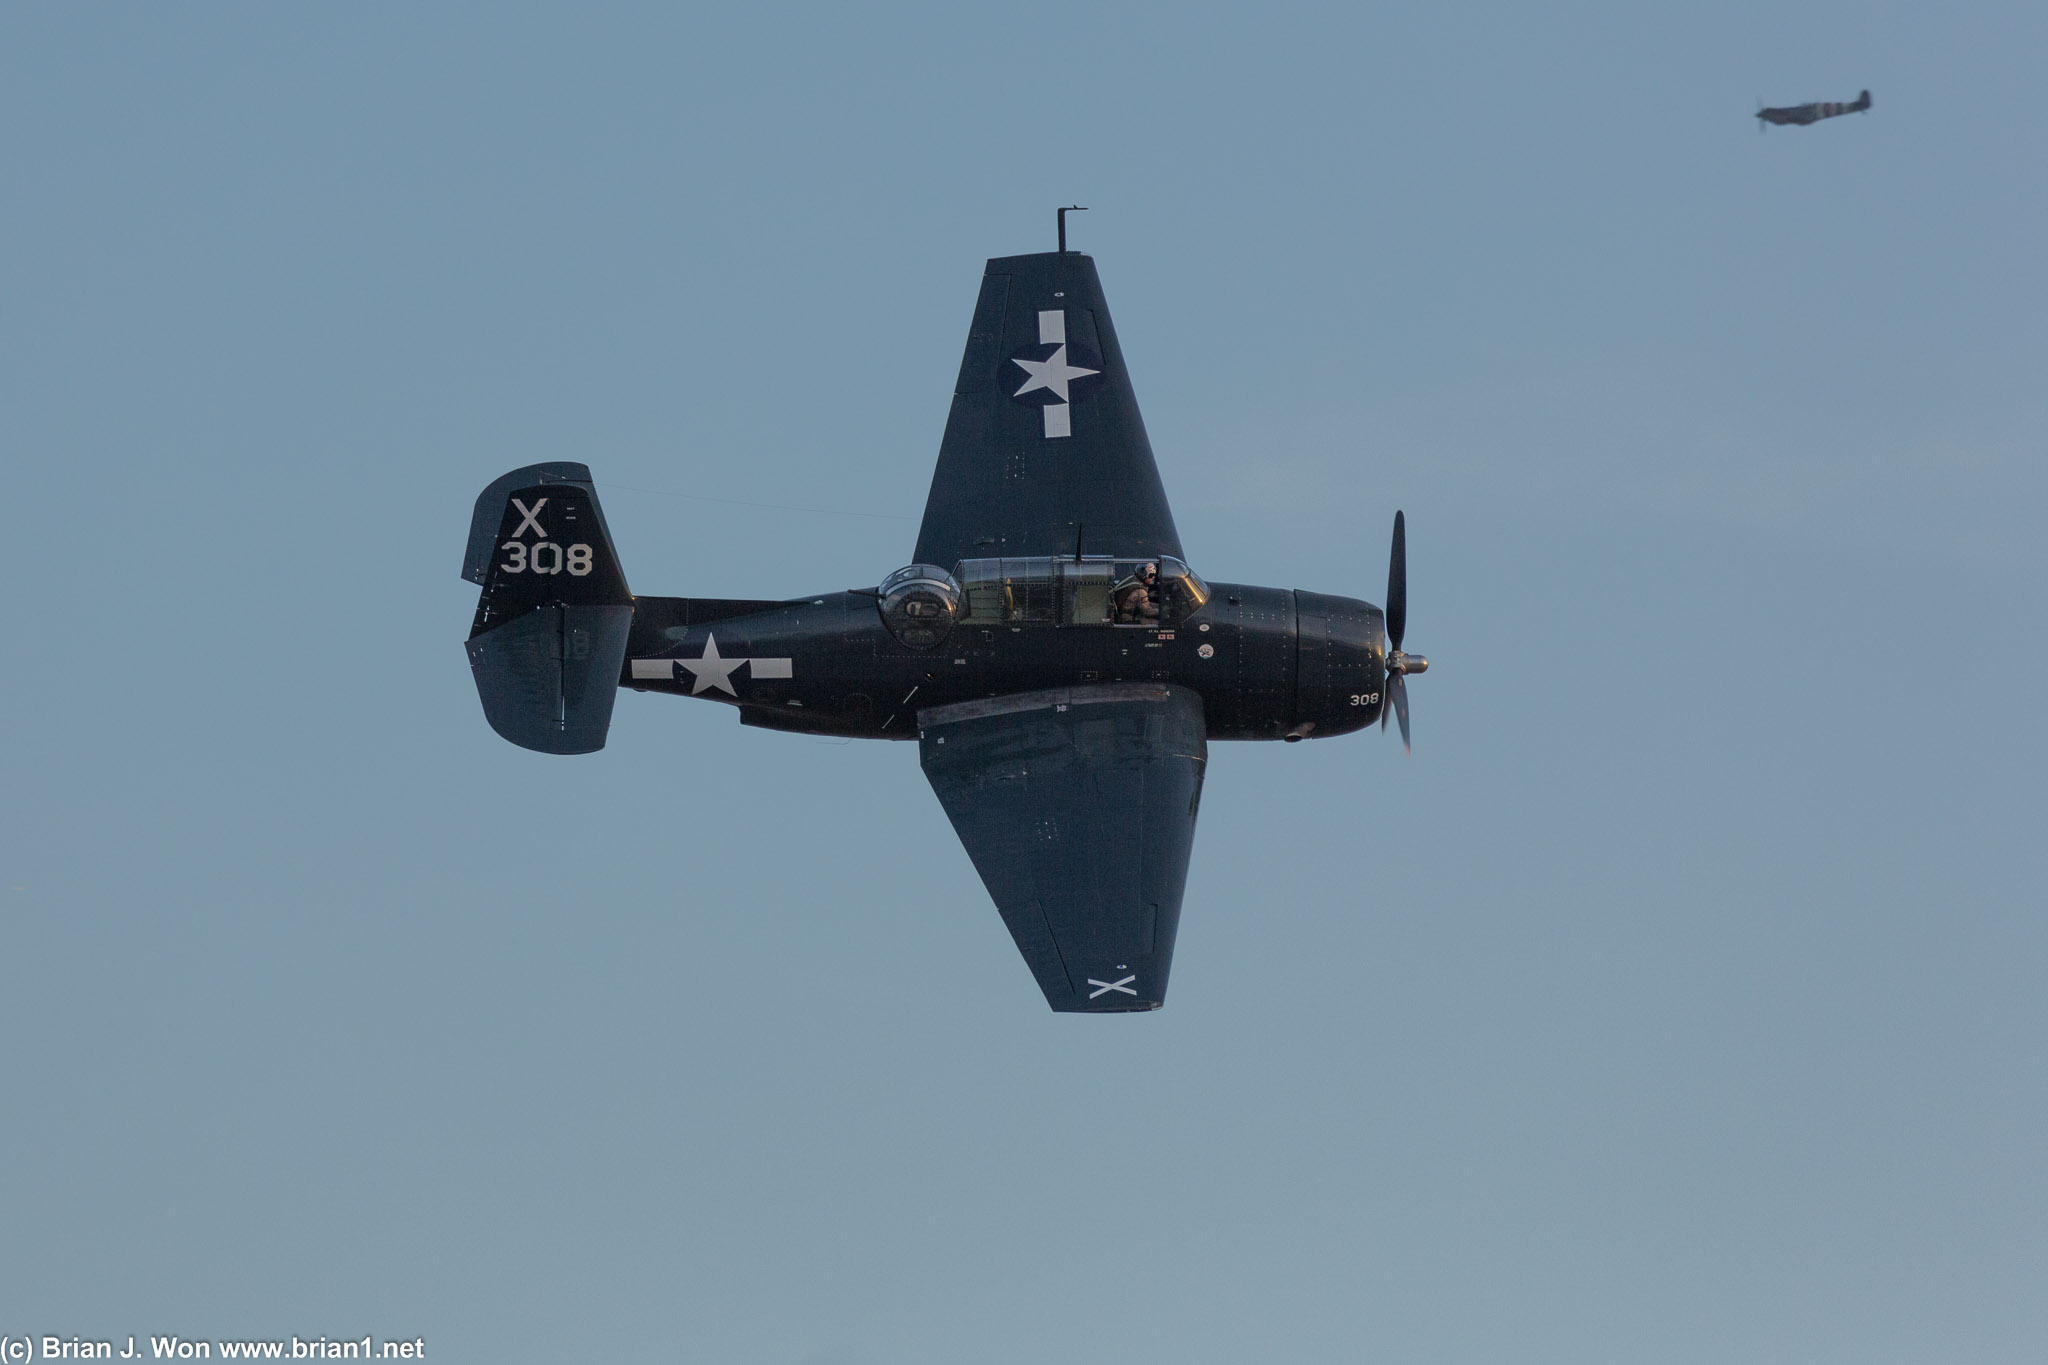 TBM-3E Avenger with Supermarine Spitfire in the background.